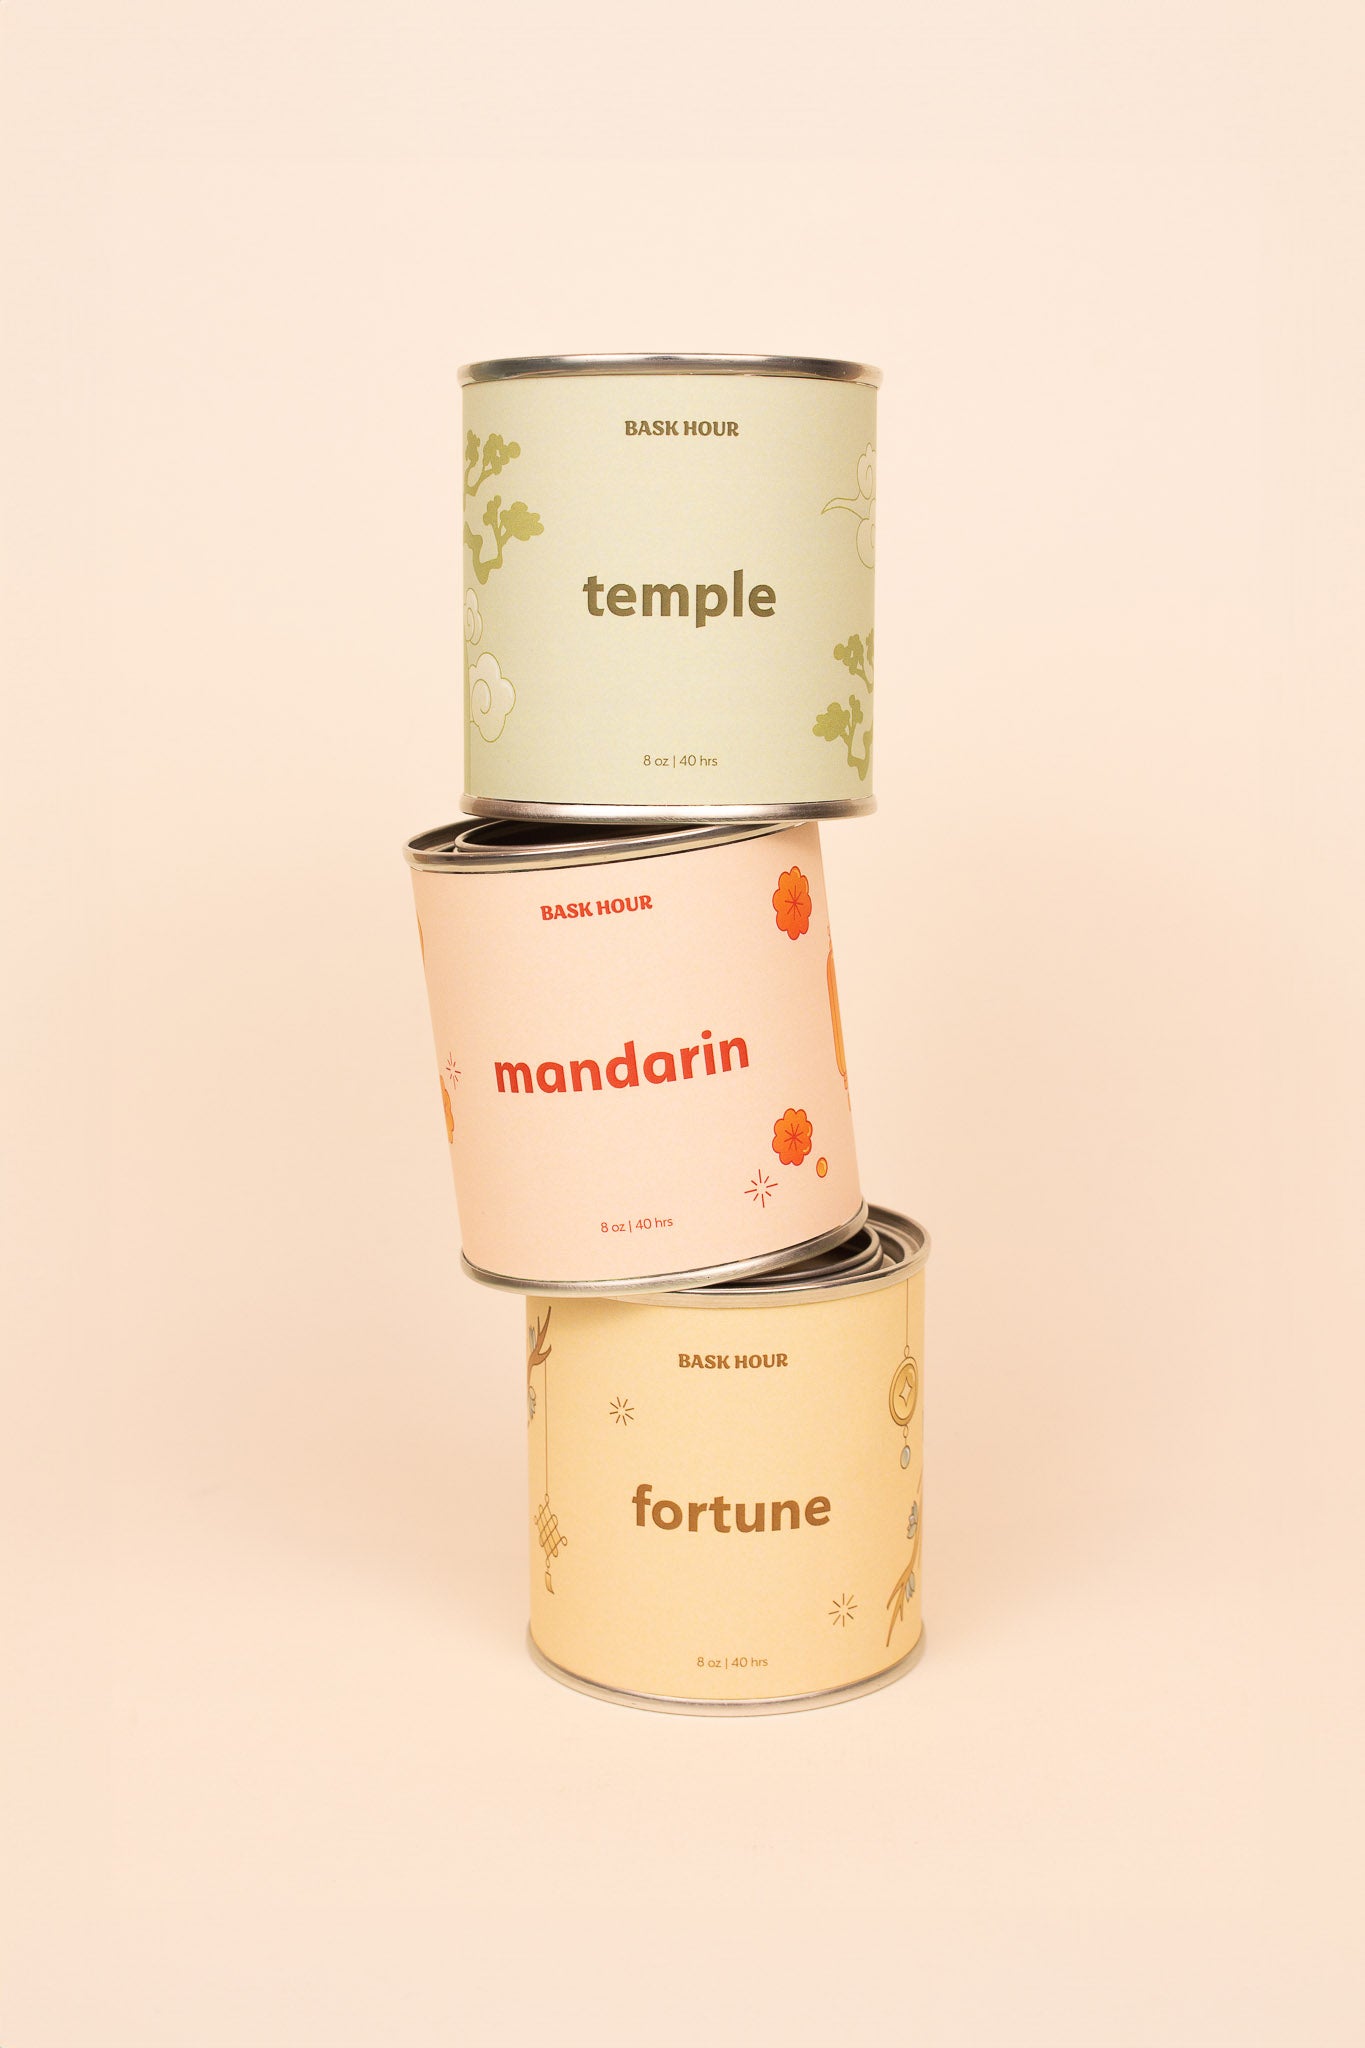 Enjoy all three Lunar New Year limited edition Bask Hour candles (Fortune, Mandarin, and Temple) to give as the perfect gift or cherished individually.